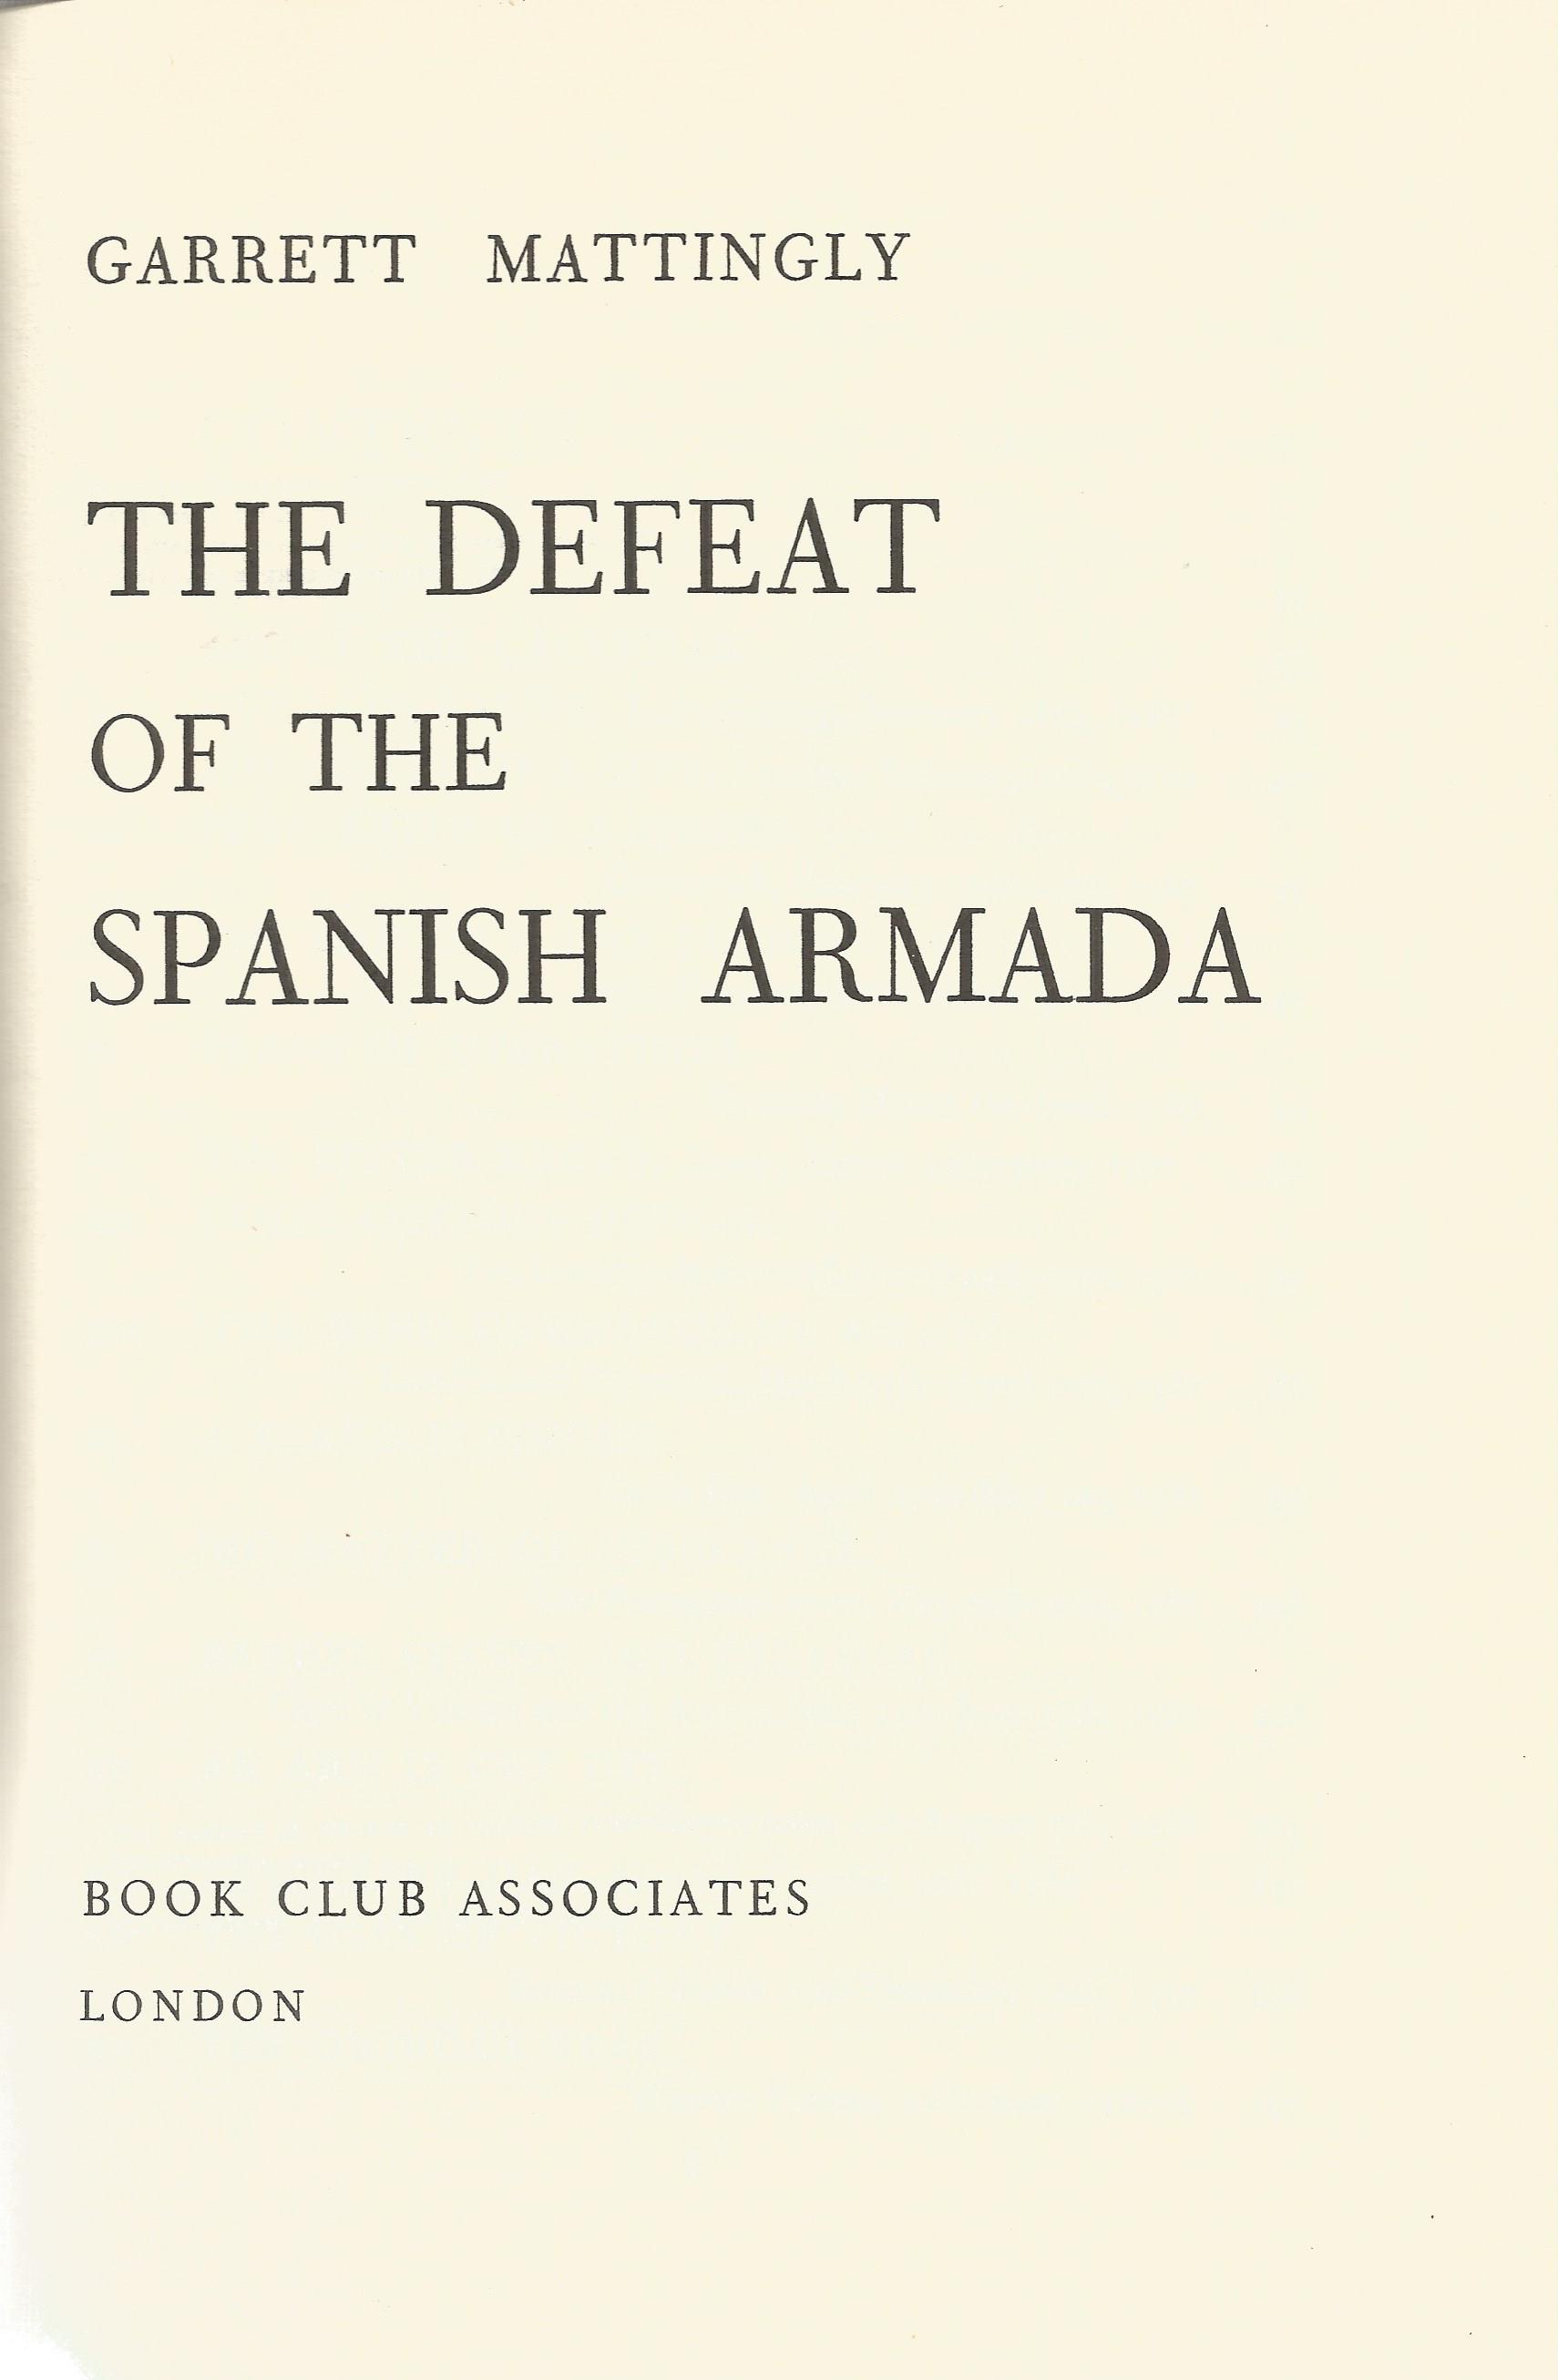 The Defeat of The Spanish Armada by Garrett Mattingly Hardback Book 1972 published by Book Club - Image 2 of 3